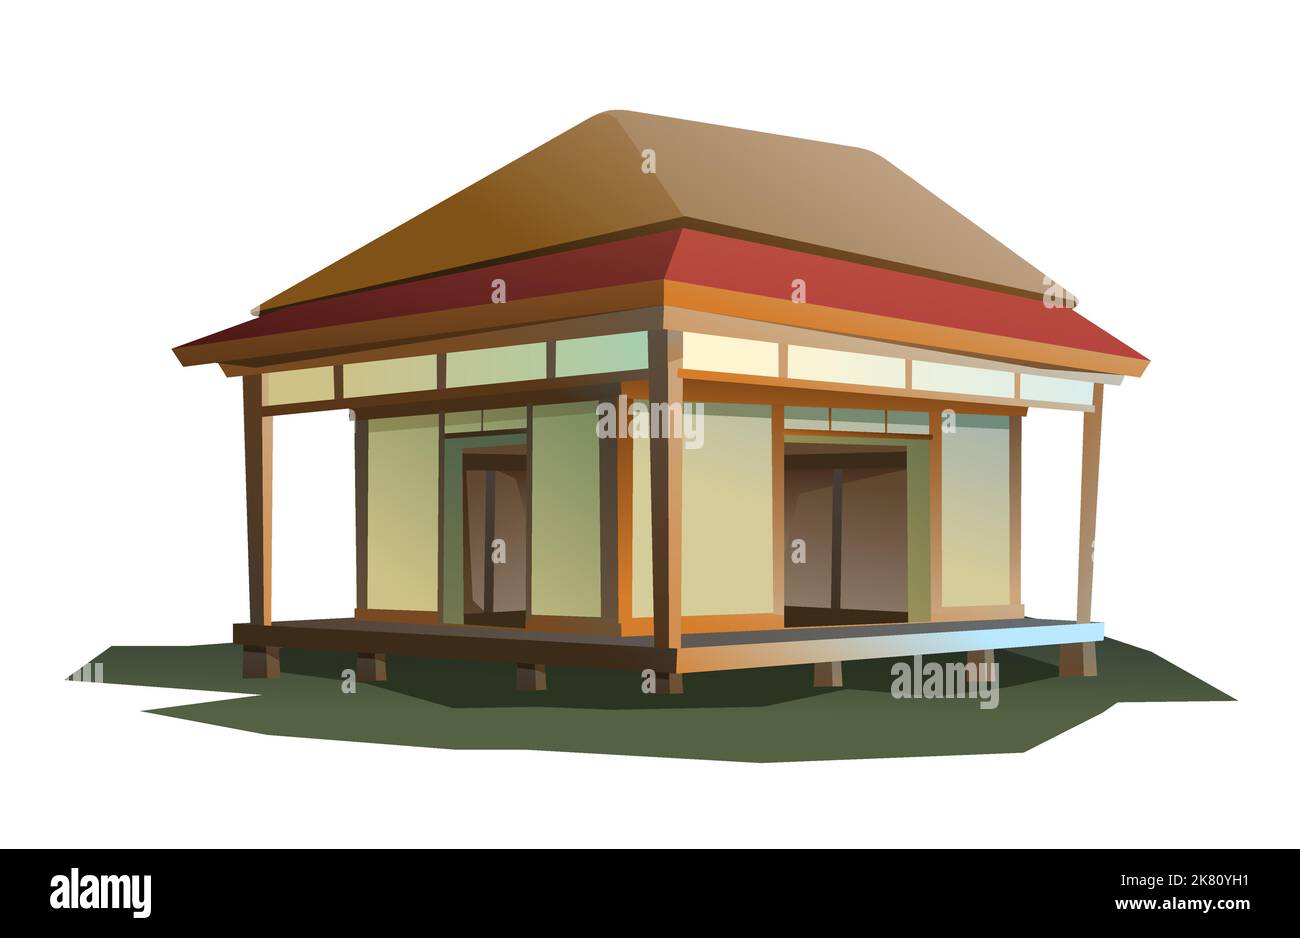 Traditional Japanese house. Rural dwelling with thatched roof. illustration vector Stock Vector